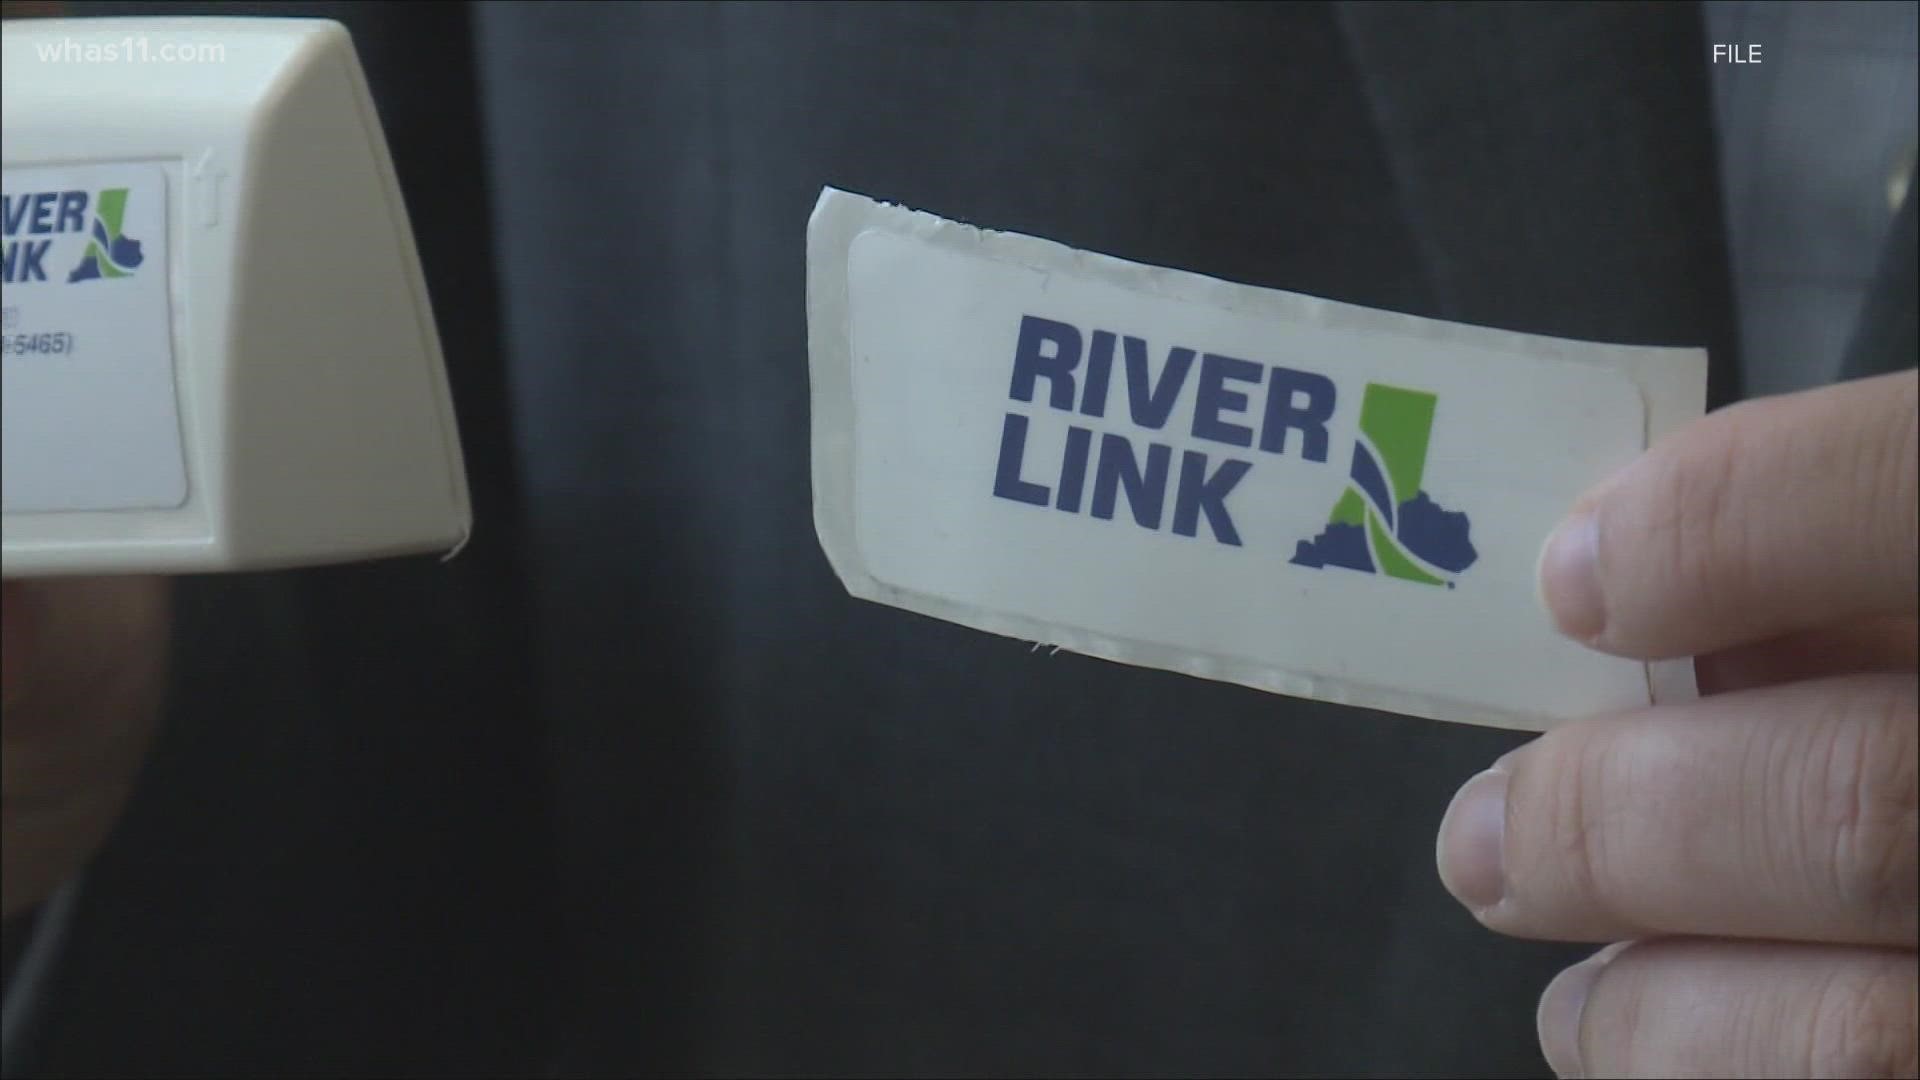 Drivers with RiverLink accounts will go from paying $2.21 to cross the bridges in either direction, to a minimum of $2.40. Expect to pay double without an account.